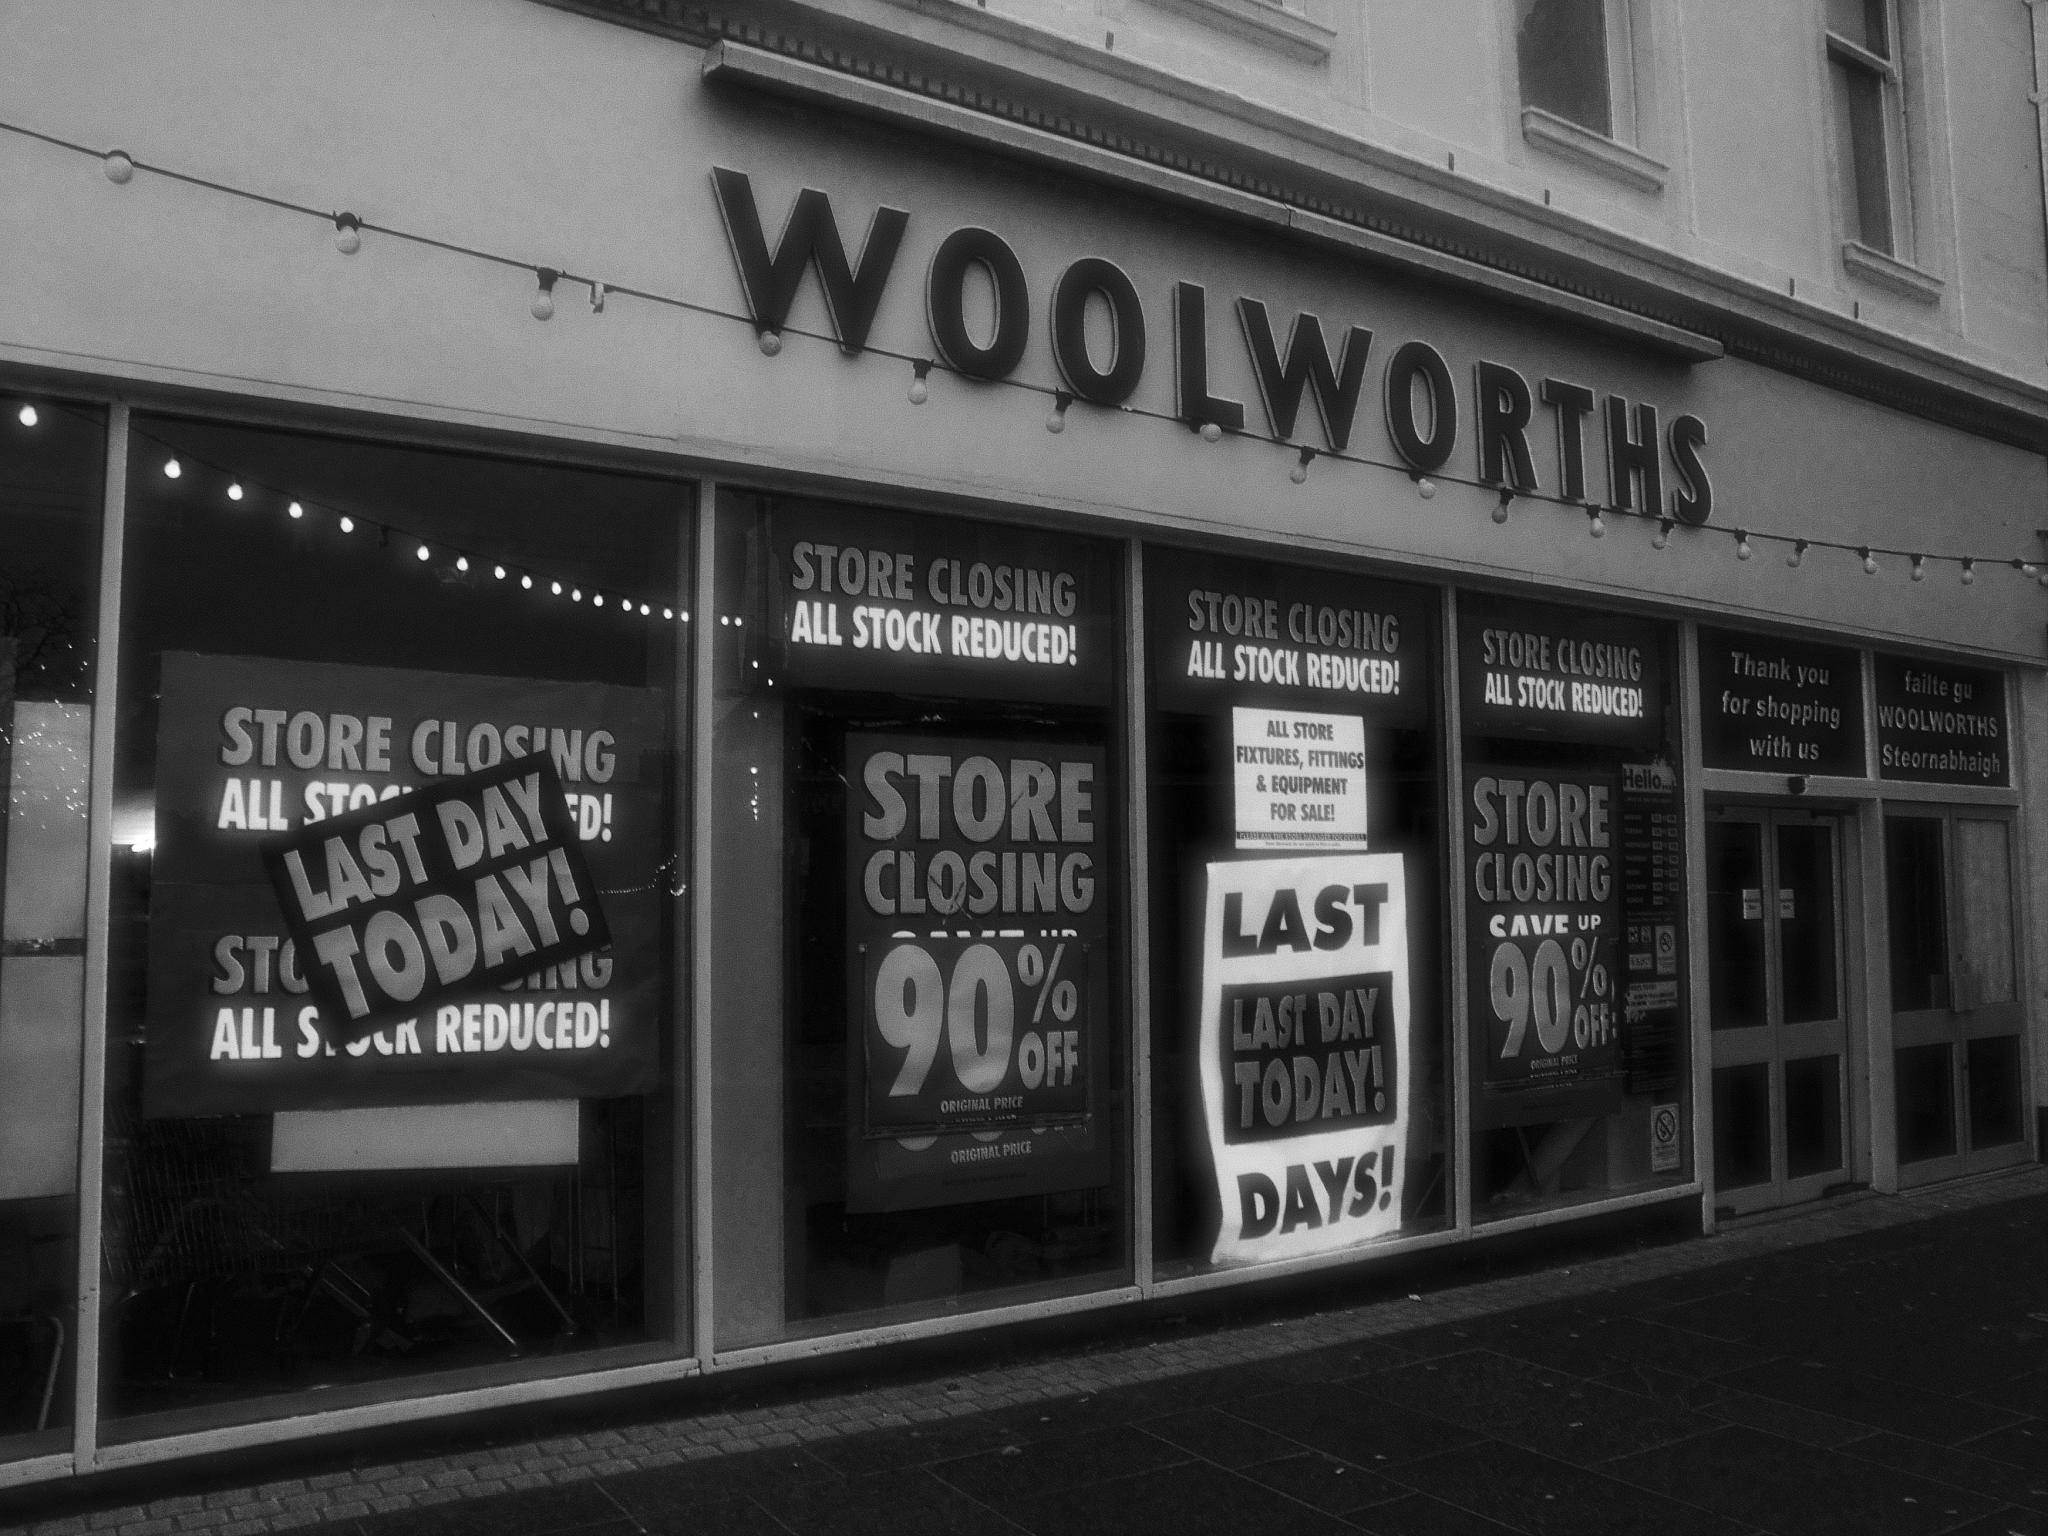 Photograph: Woolworths